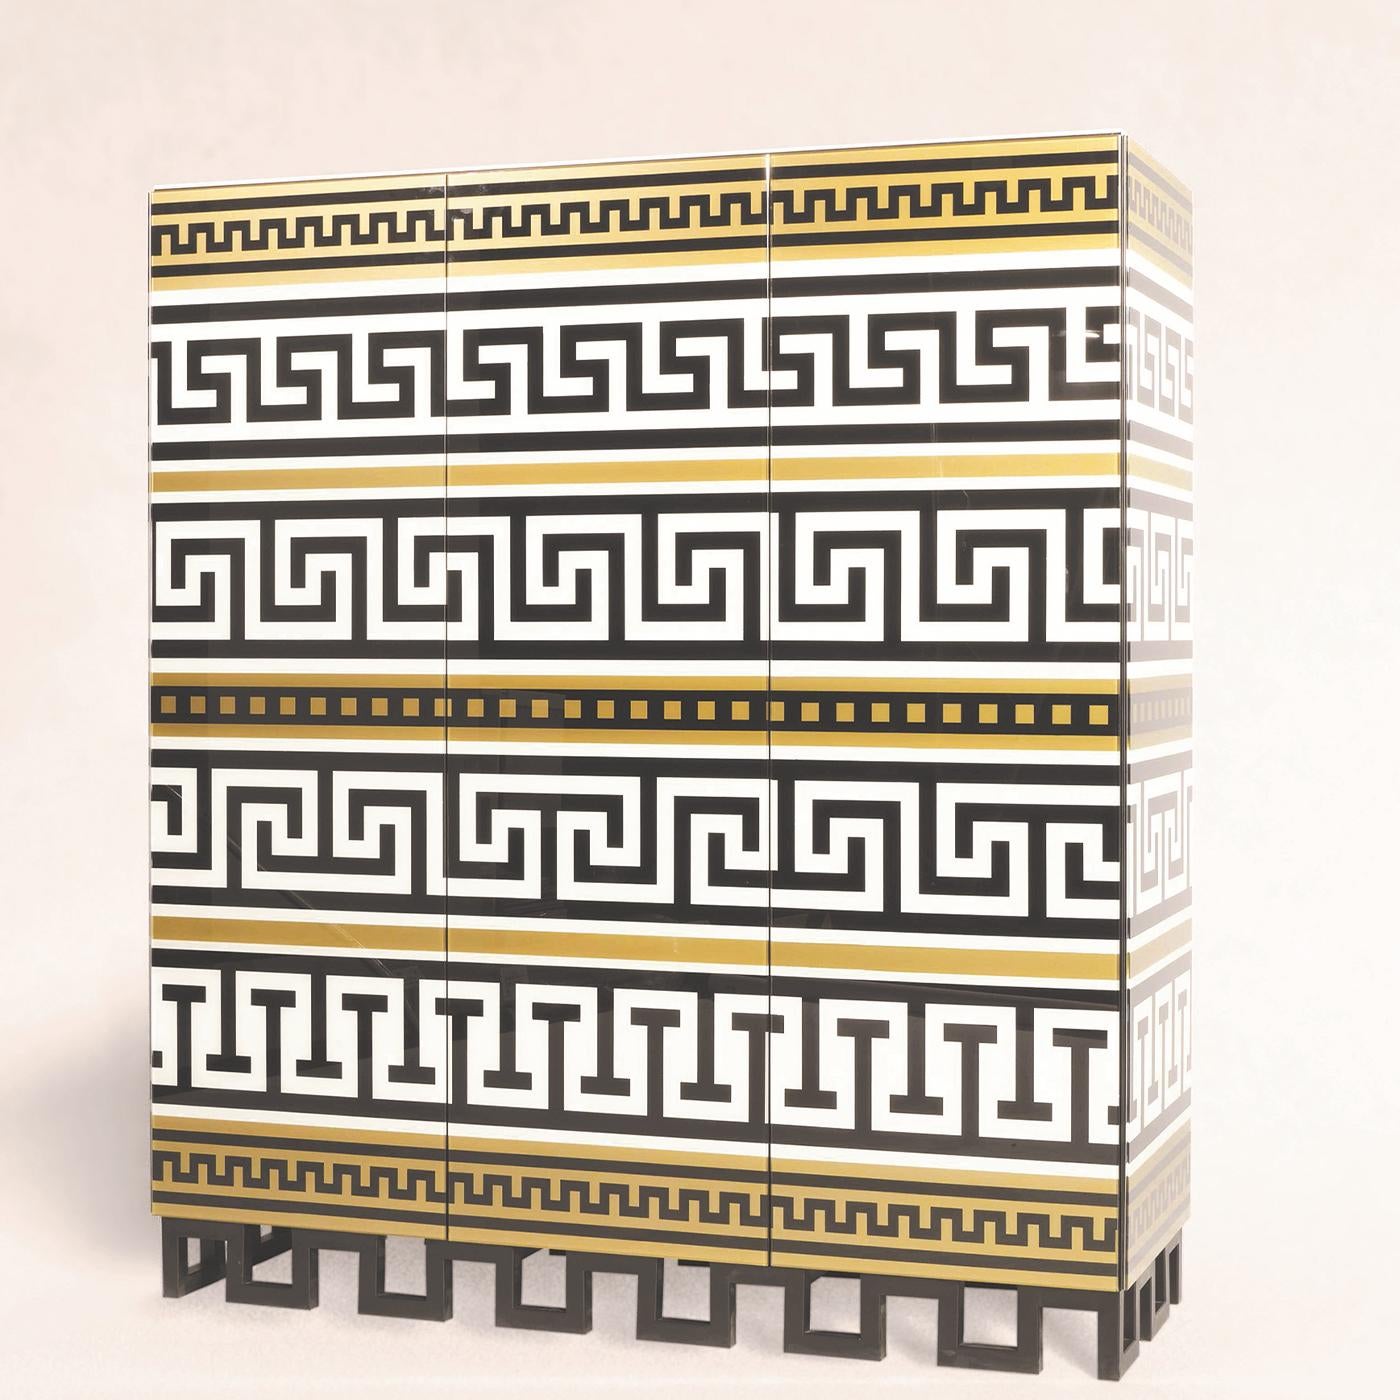 This Avola cabinet re-appropriates an hypnotic black and white pattern frequently seen on archaeological finds in Sicily from both the Greek and Roman periods. The decoration is silk-screened on glass and covers both the cabinet’s frame and doors.